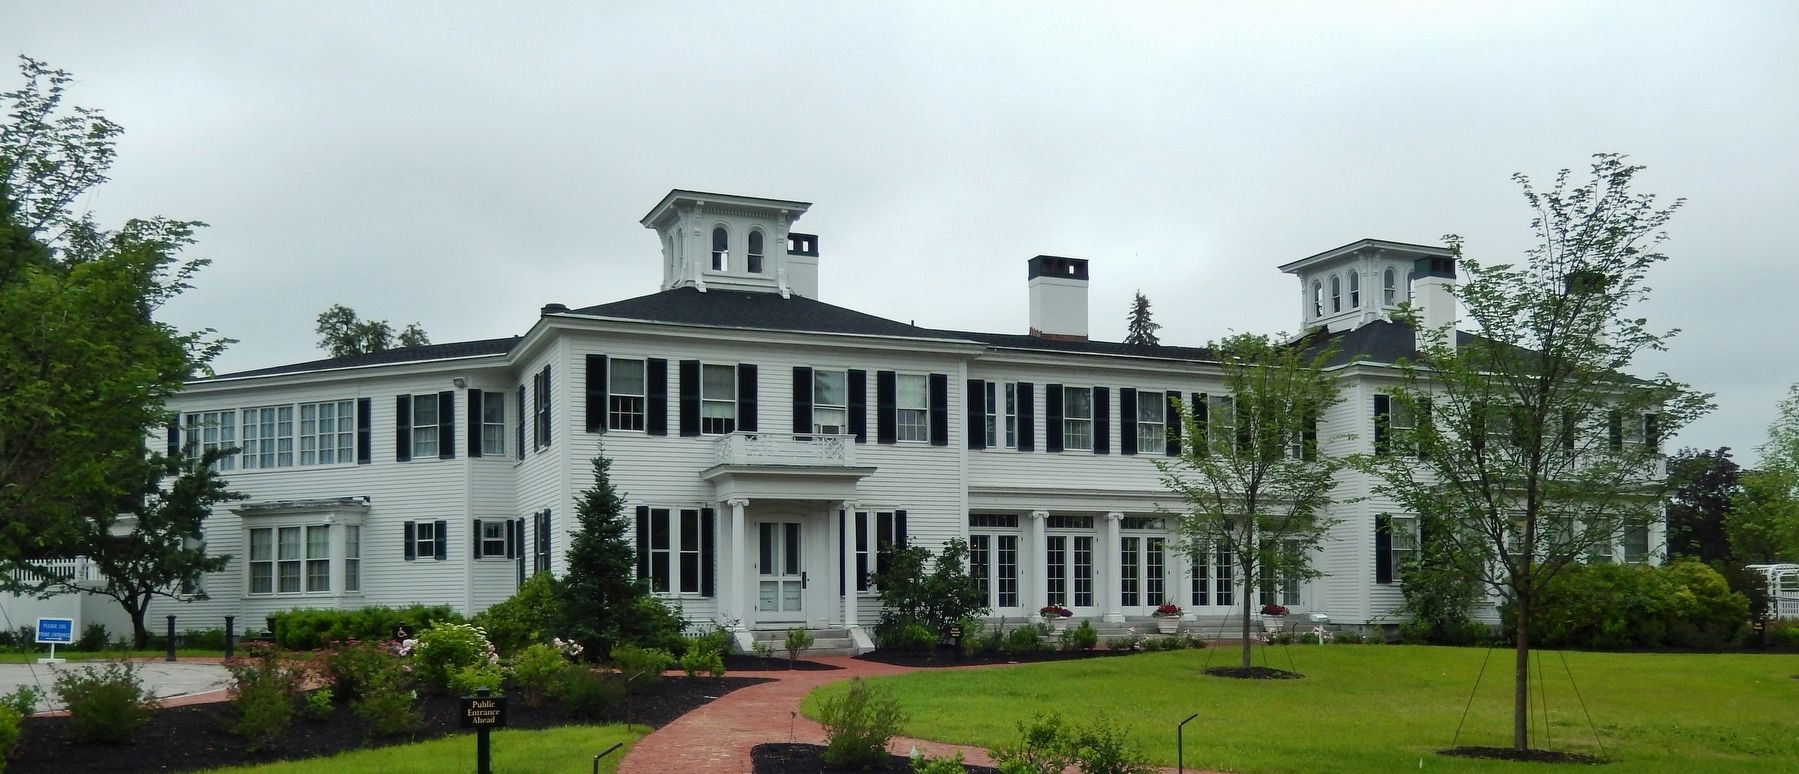 Blaine Mansion (<i>view from near marker</i>) image. Click for full size.